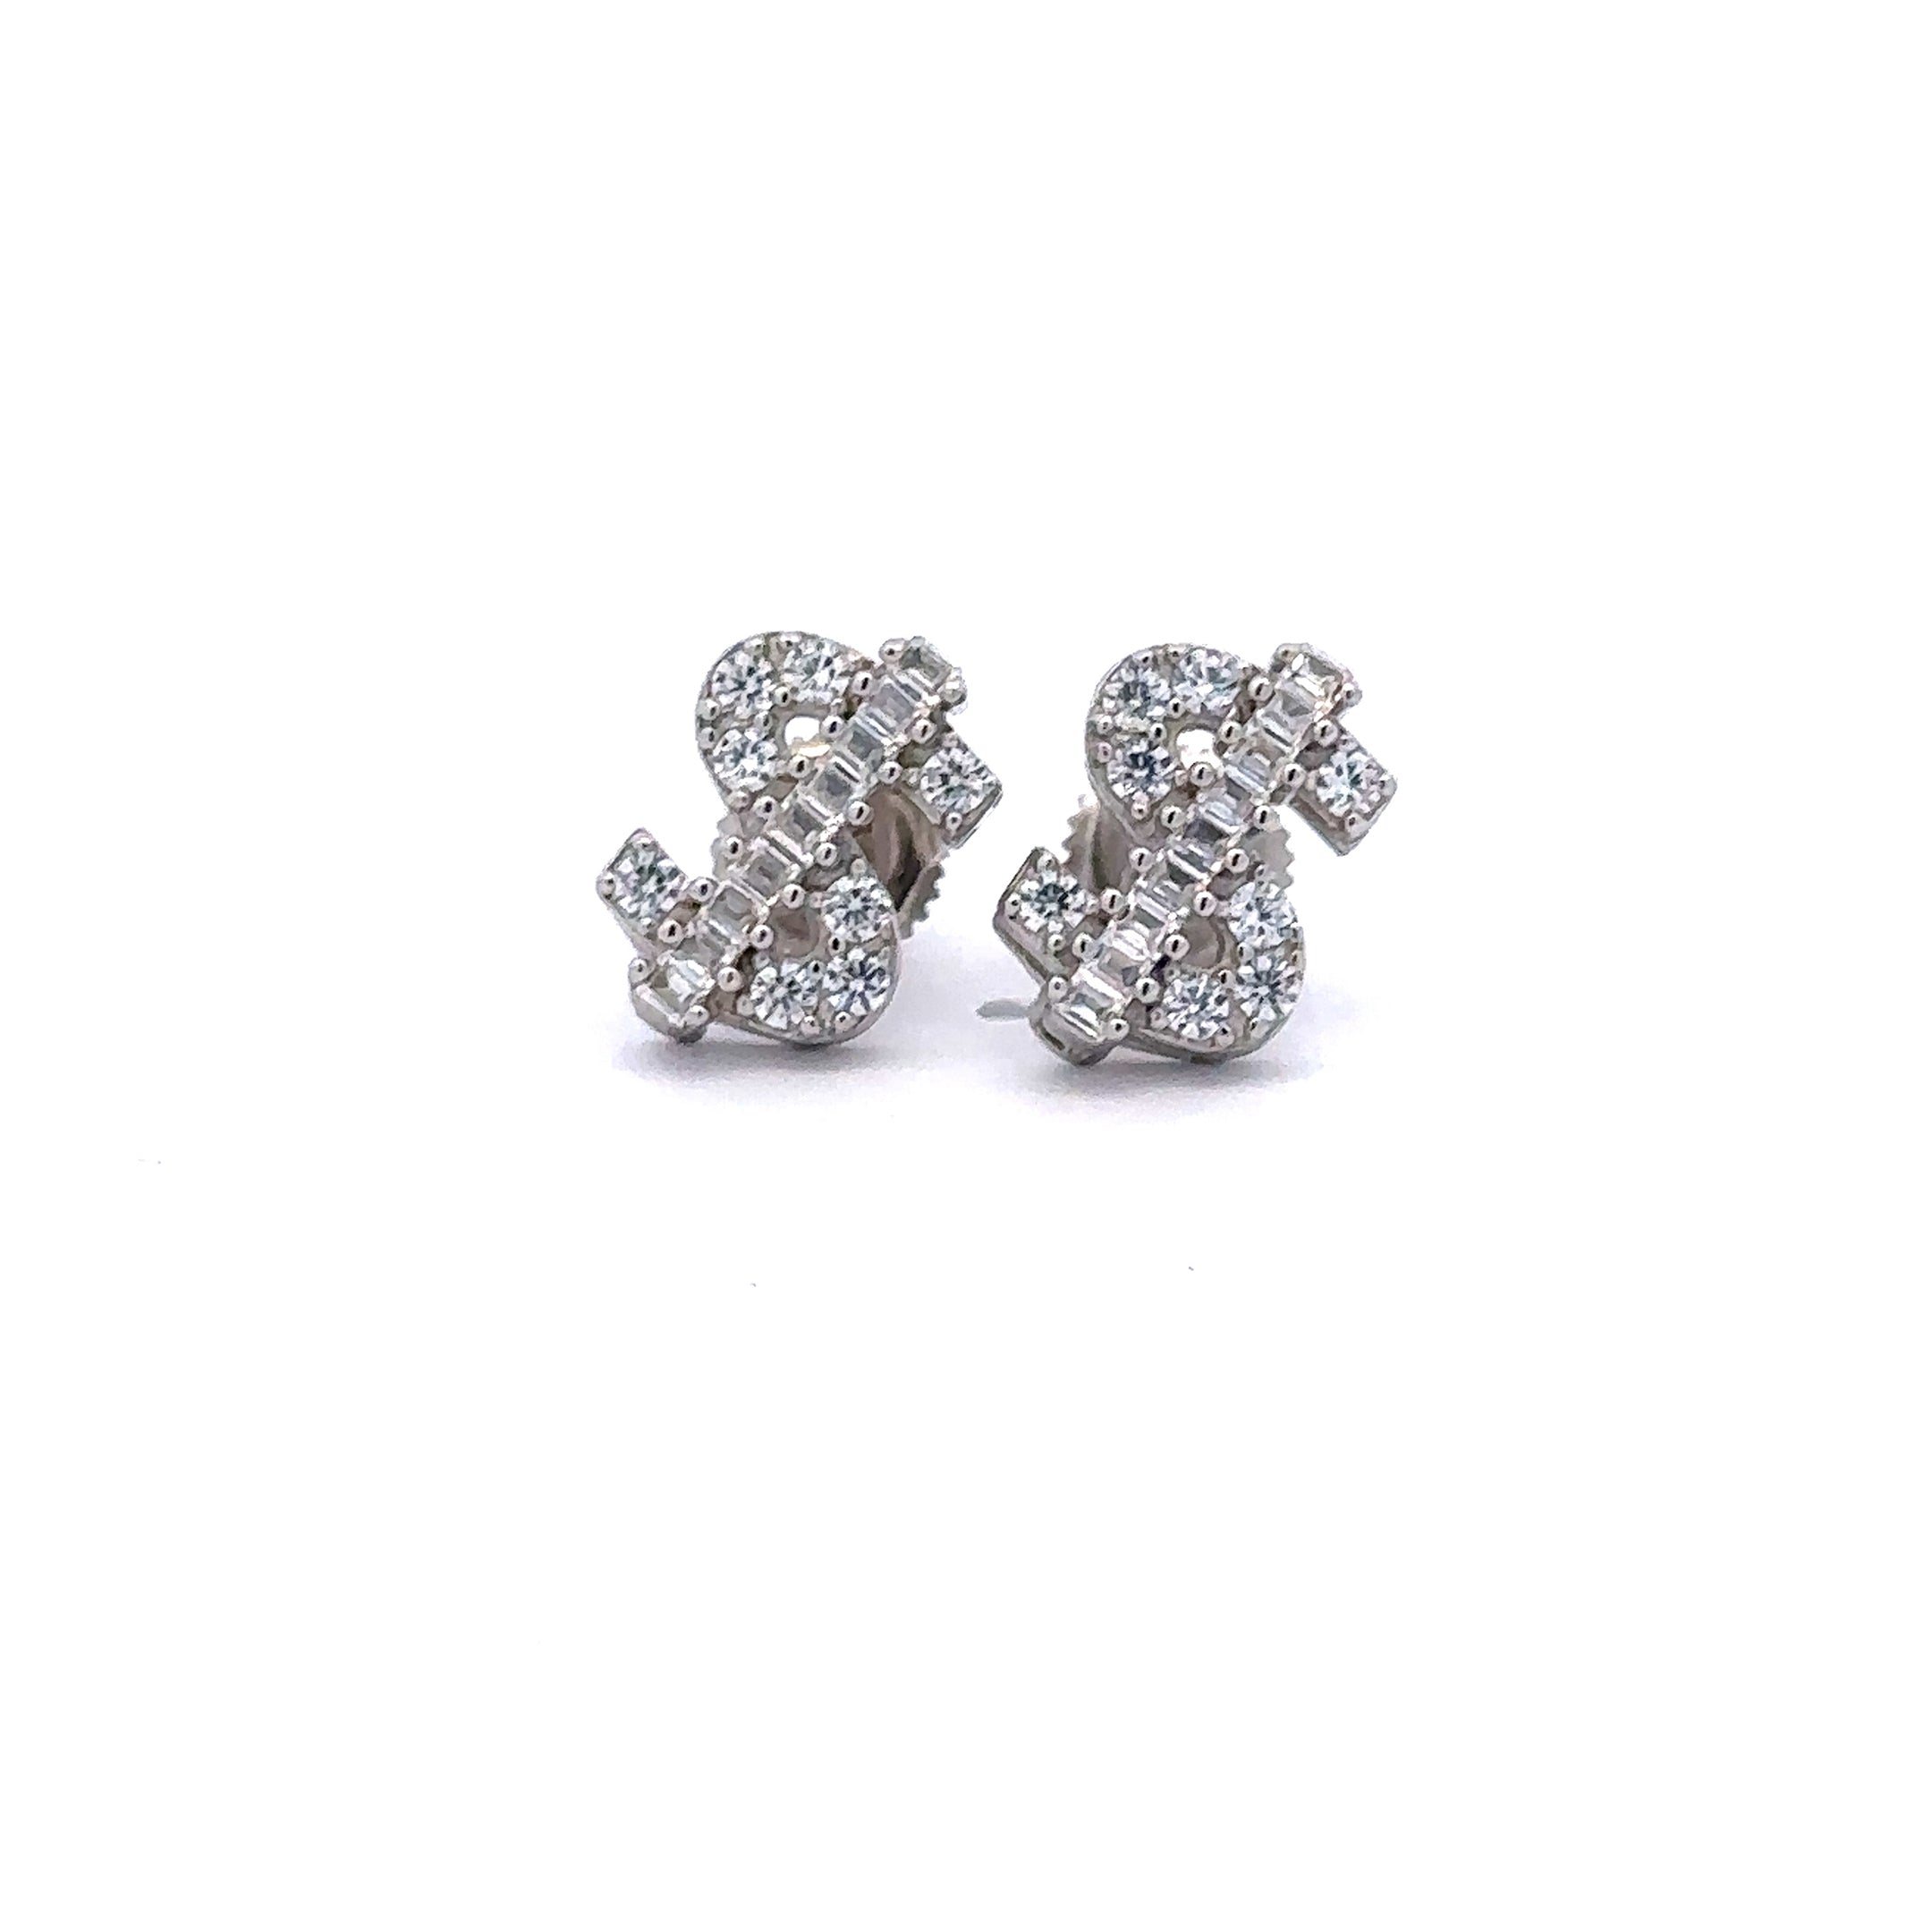 XANTHEA 925 CZ RHODIUM ICED OUT EARRINGS | 9217361